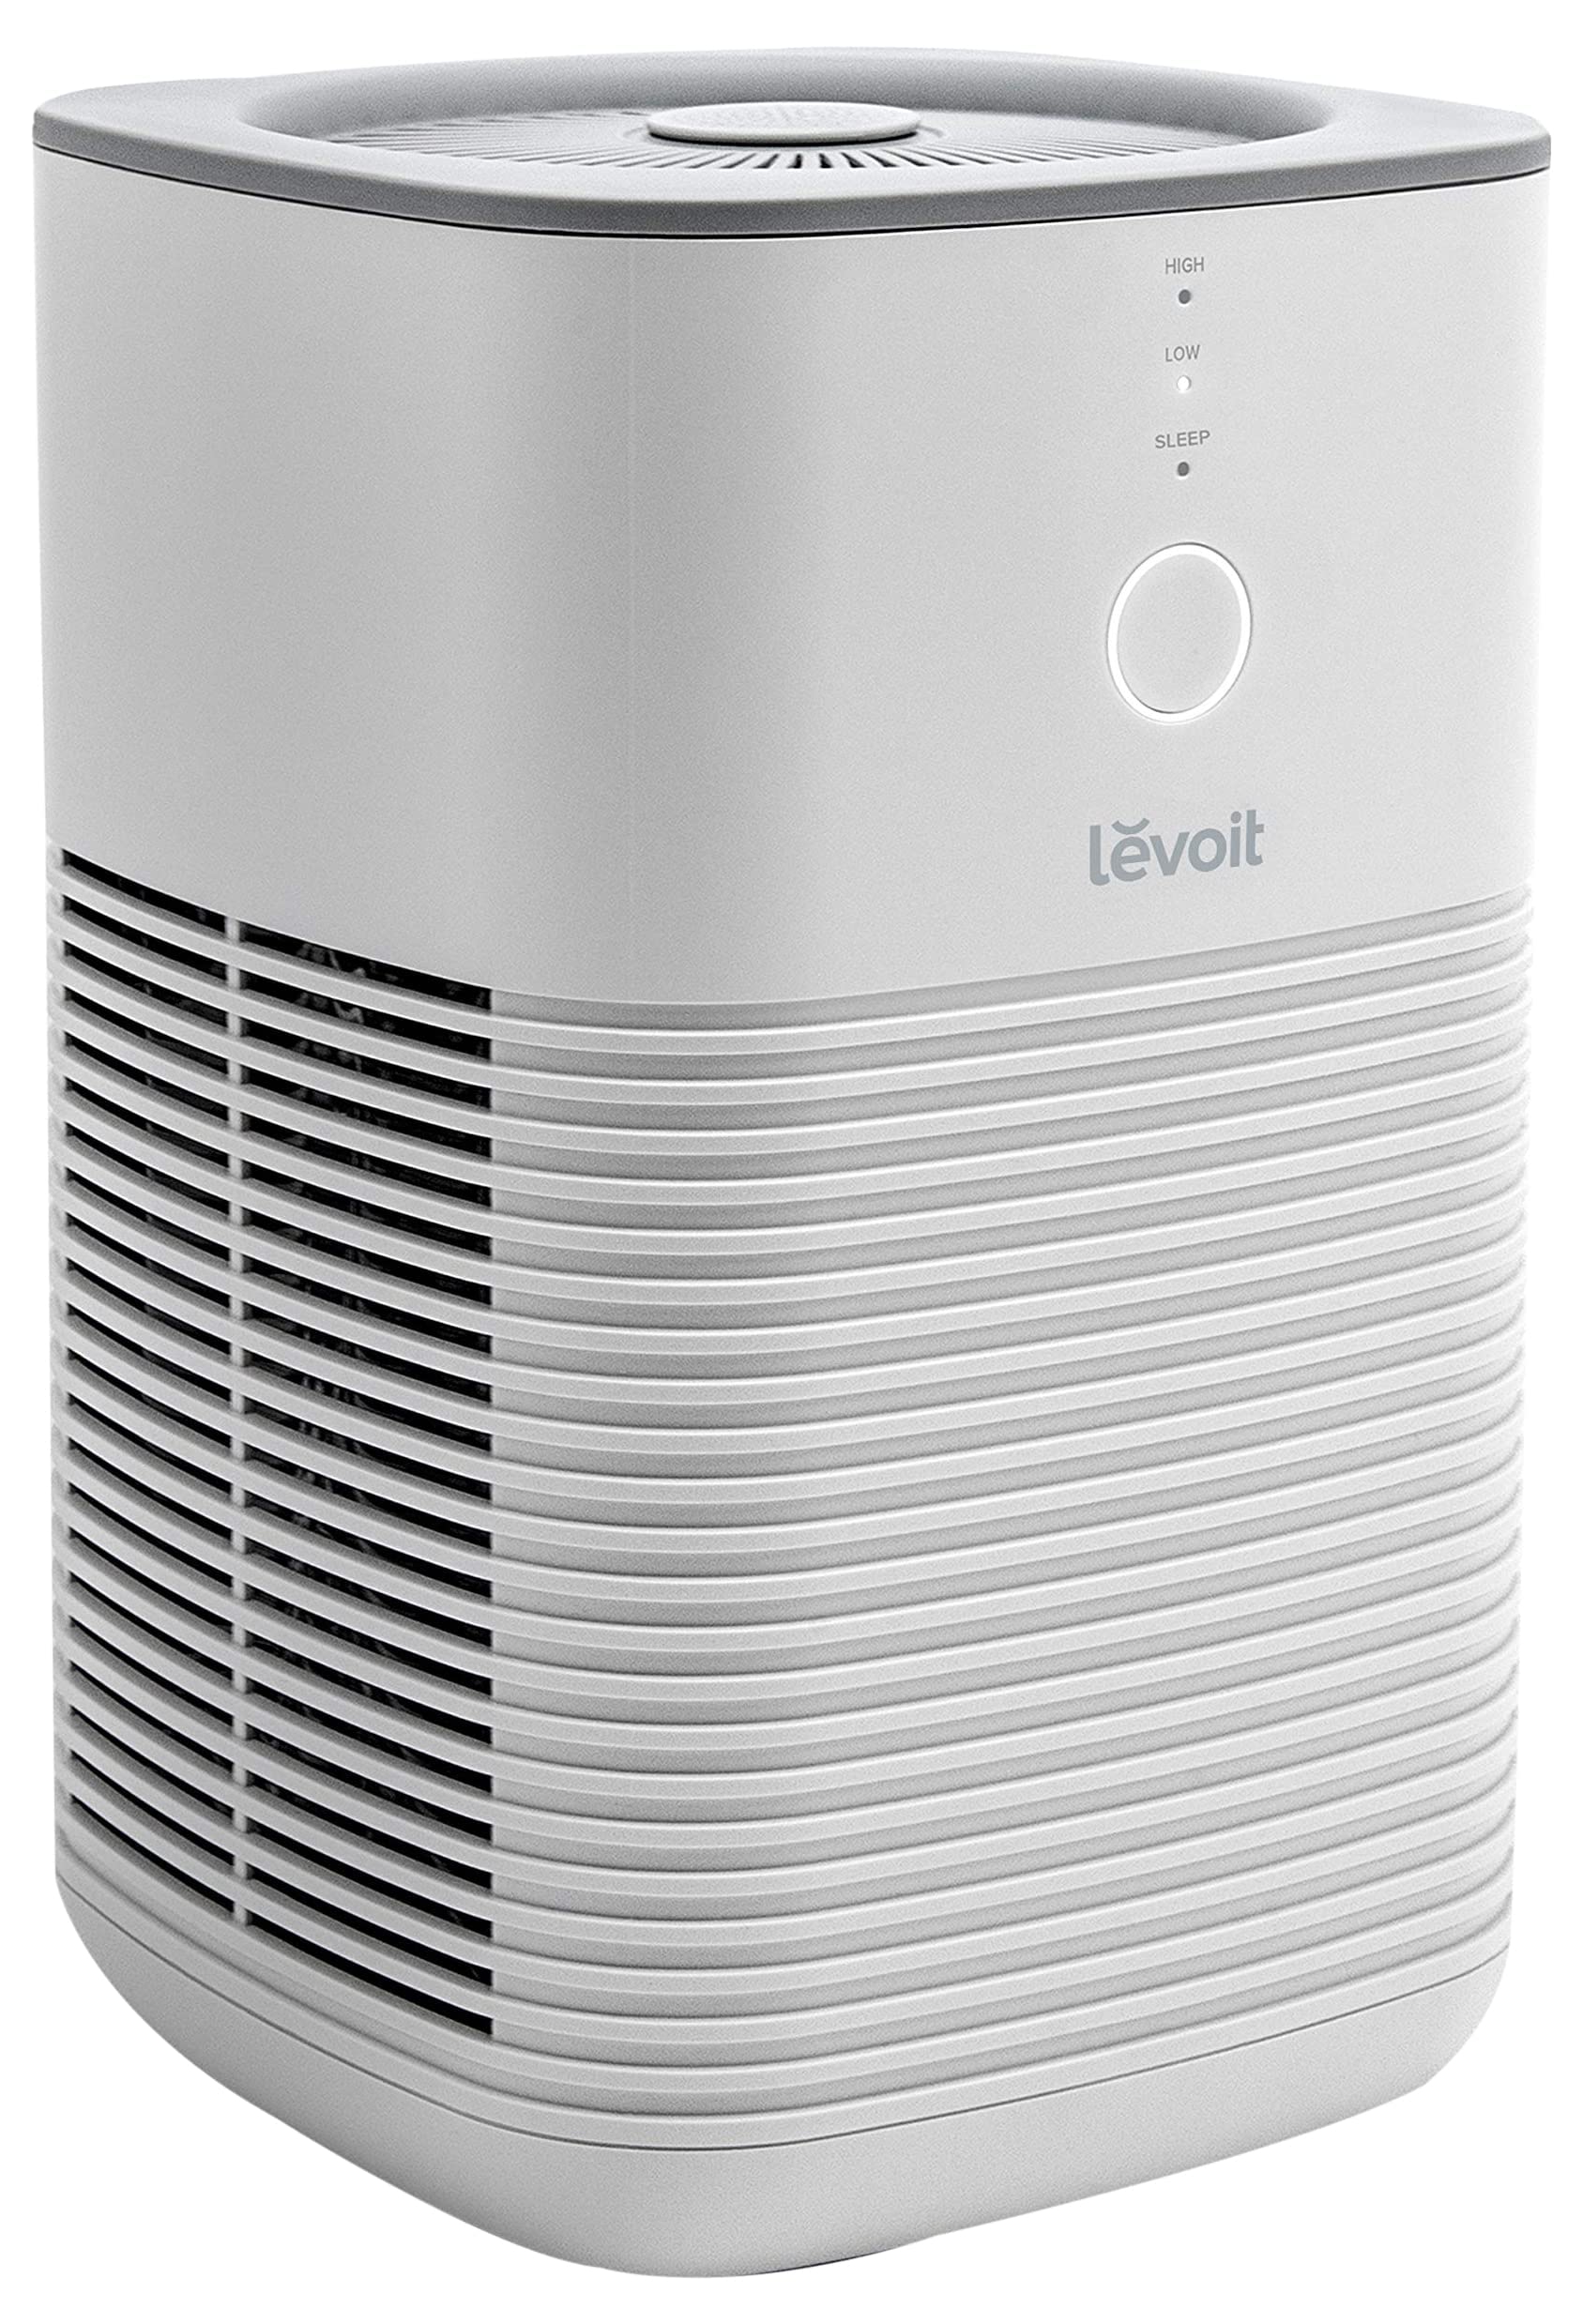 LEVOIT Air Purifier for Home Bedroom, HEPA Fresheners Filter Small Room Cleaner with Fragrance Sponge for Smoke, Allergies, Pet Dander, Odor, Dust Remover, Office, Desktop, Table Top, 1 Pack, White Air Purifier LV-H128 1 Pack